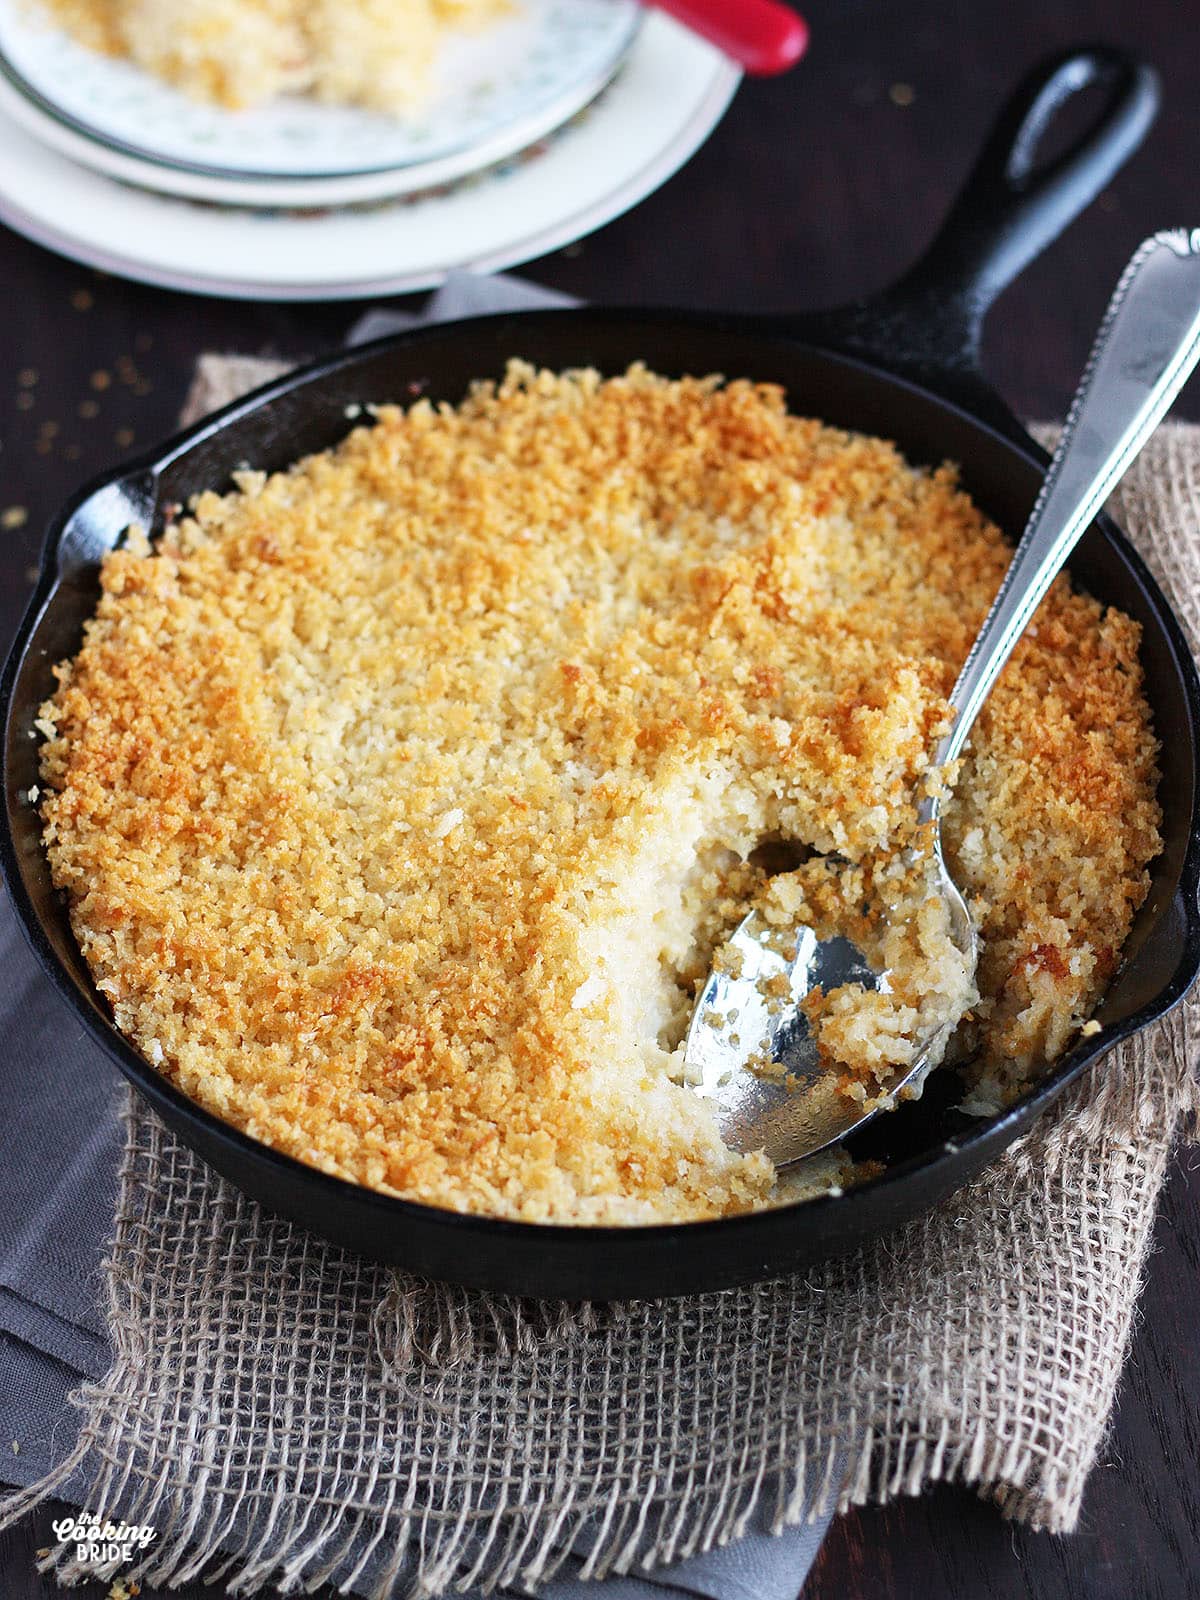 Cauliflower gratin in a cast iron skillet with a serving spoon.